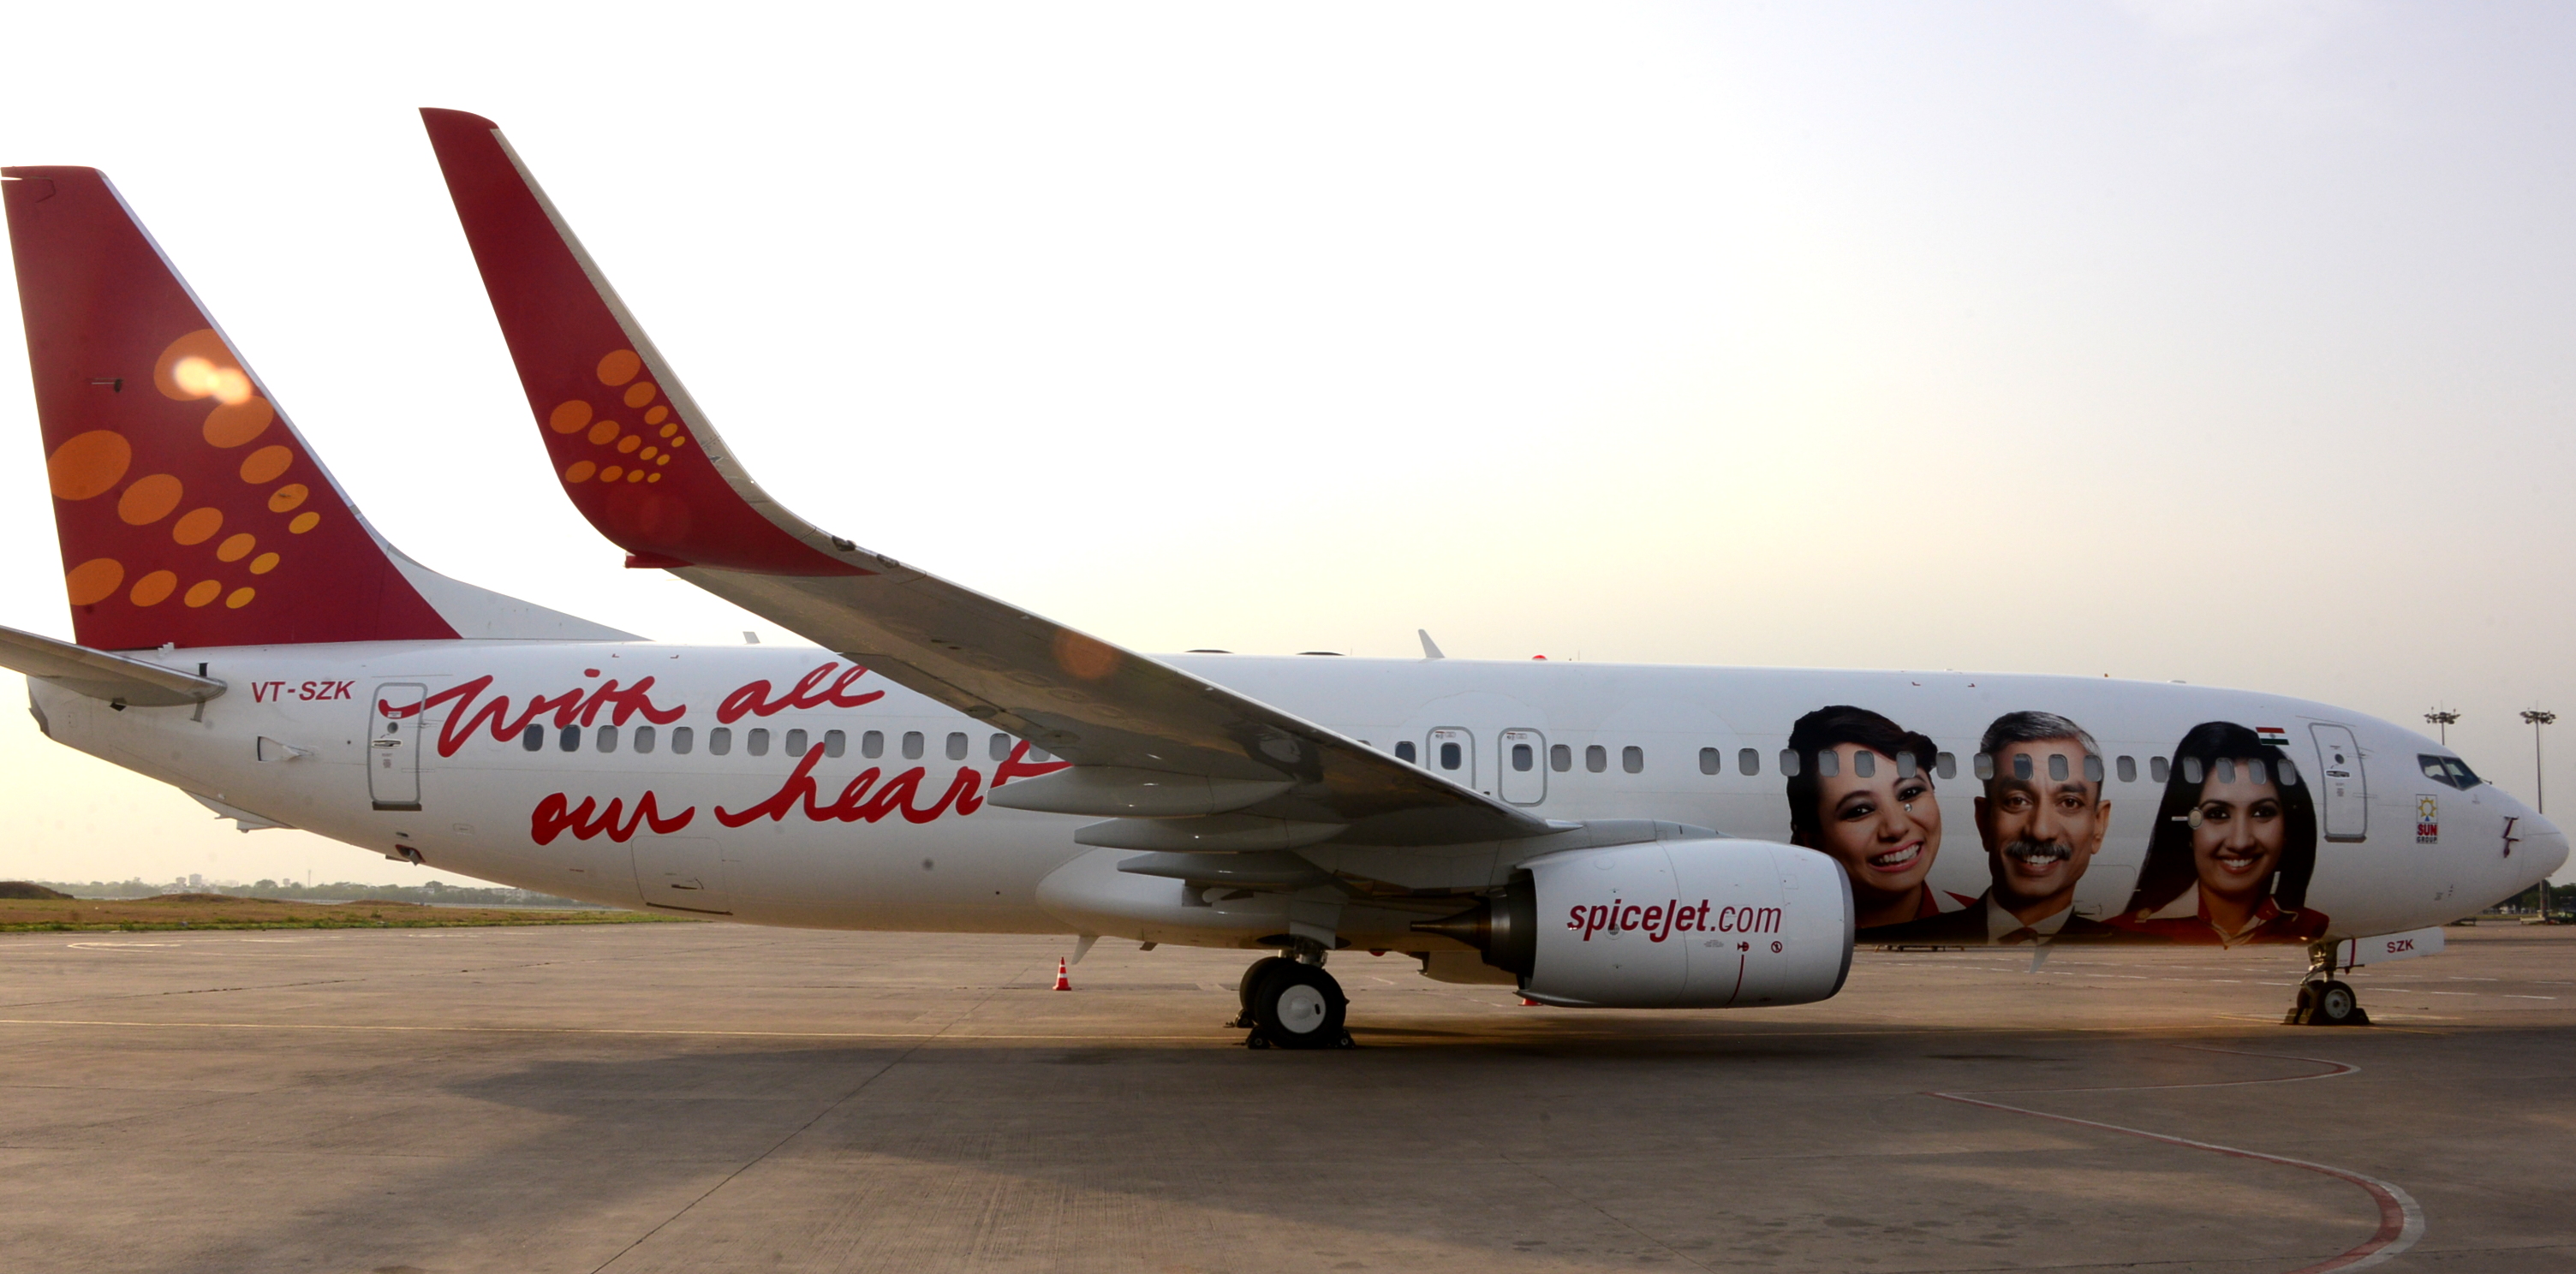 SpiceJet unveils new Boeing with special "crew livery ...